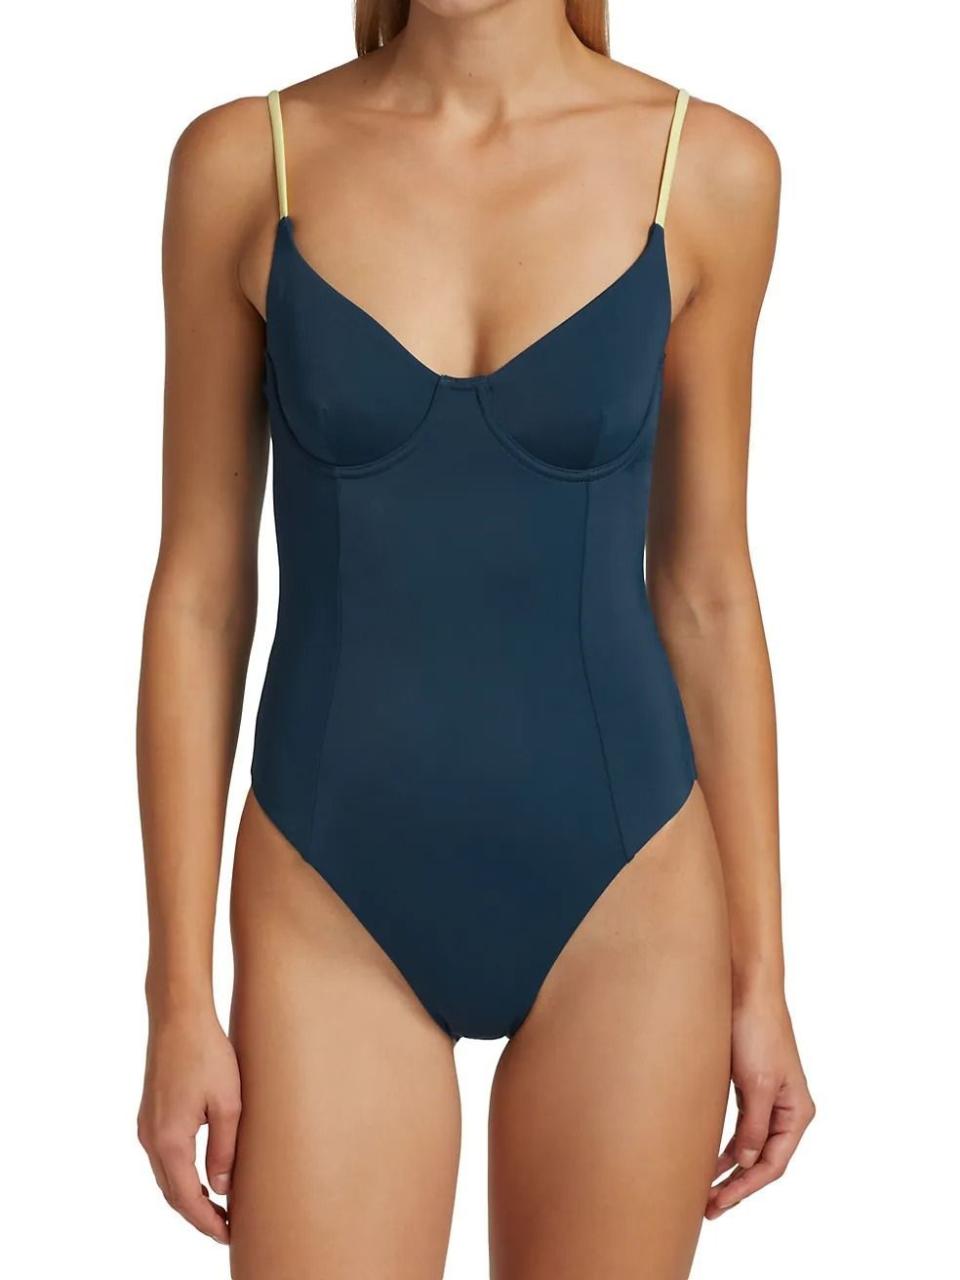 8) Onia Isabella One-Piece Swimsuit